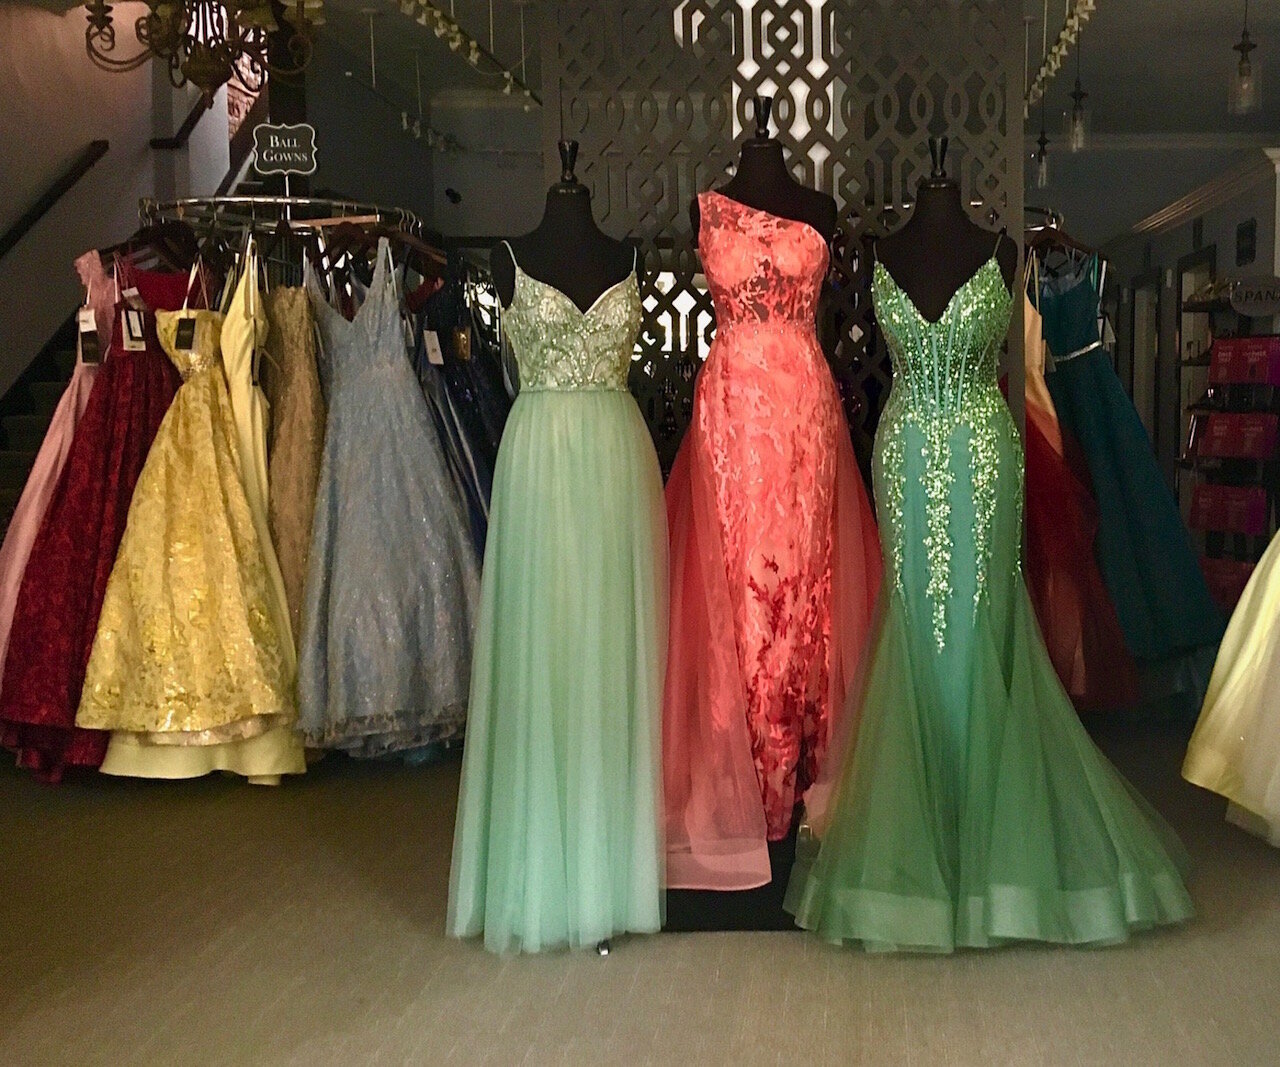 Memories Bridal & Evening Wear is a 17-year-old business located at 203 E. Michigan Ave. In downtown Kalamazoo.